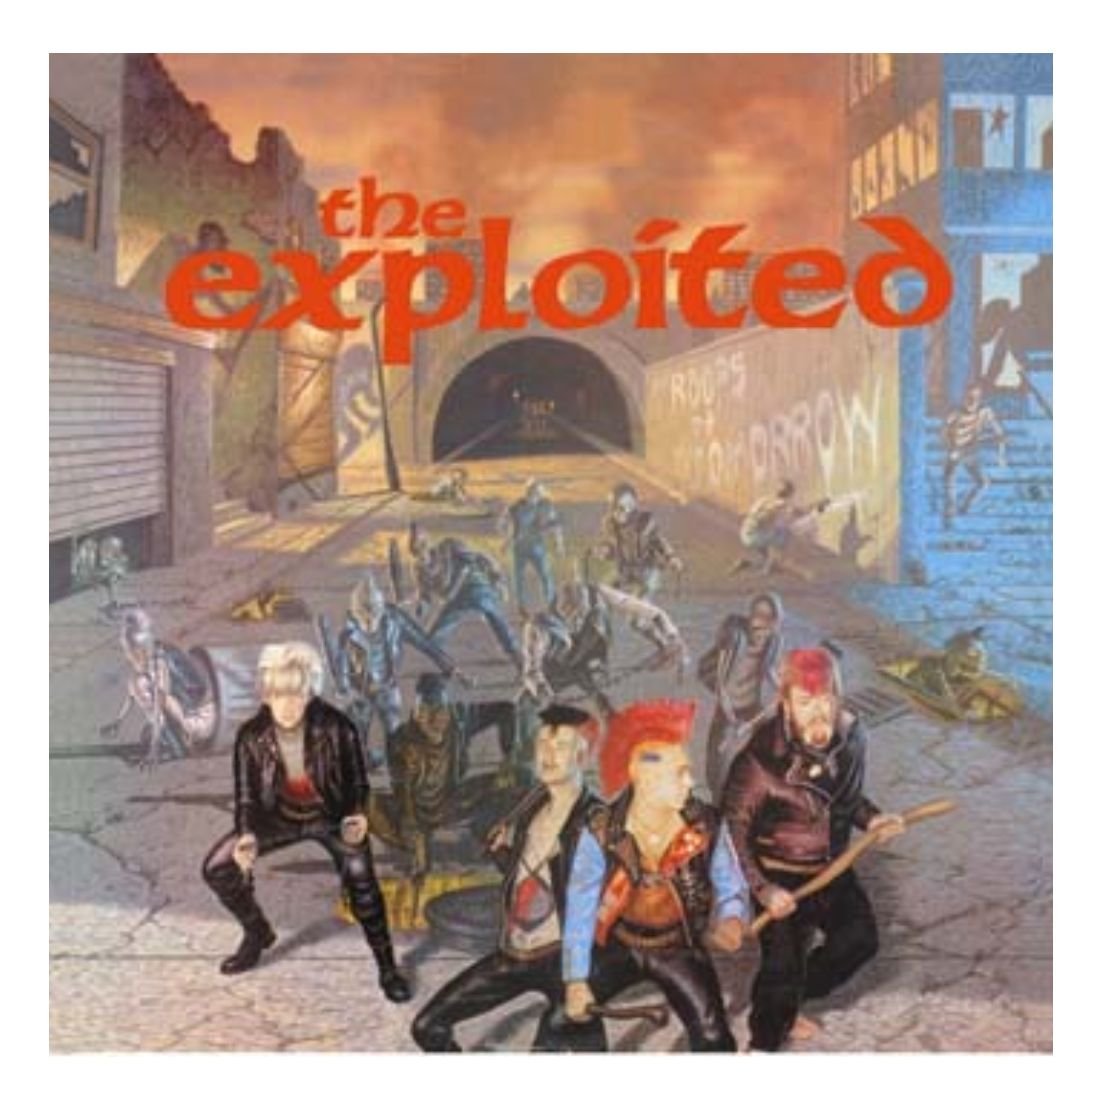 The Exploited - Troops Of Tomorrow LP